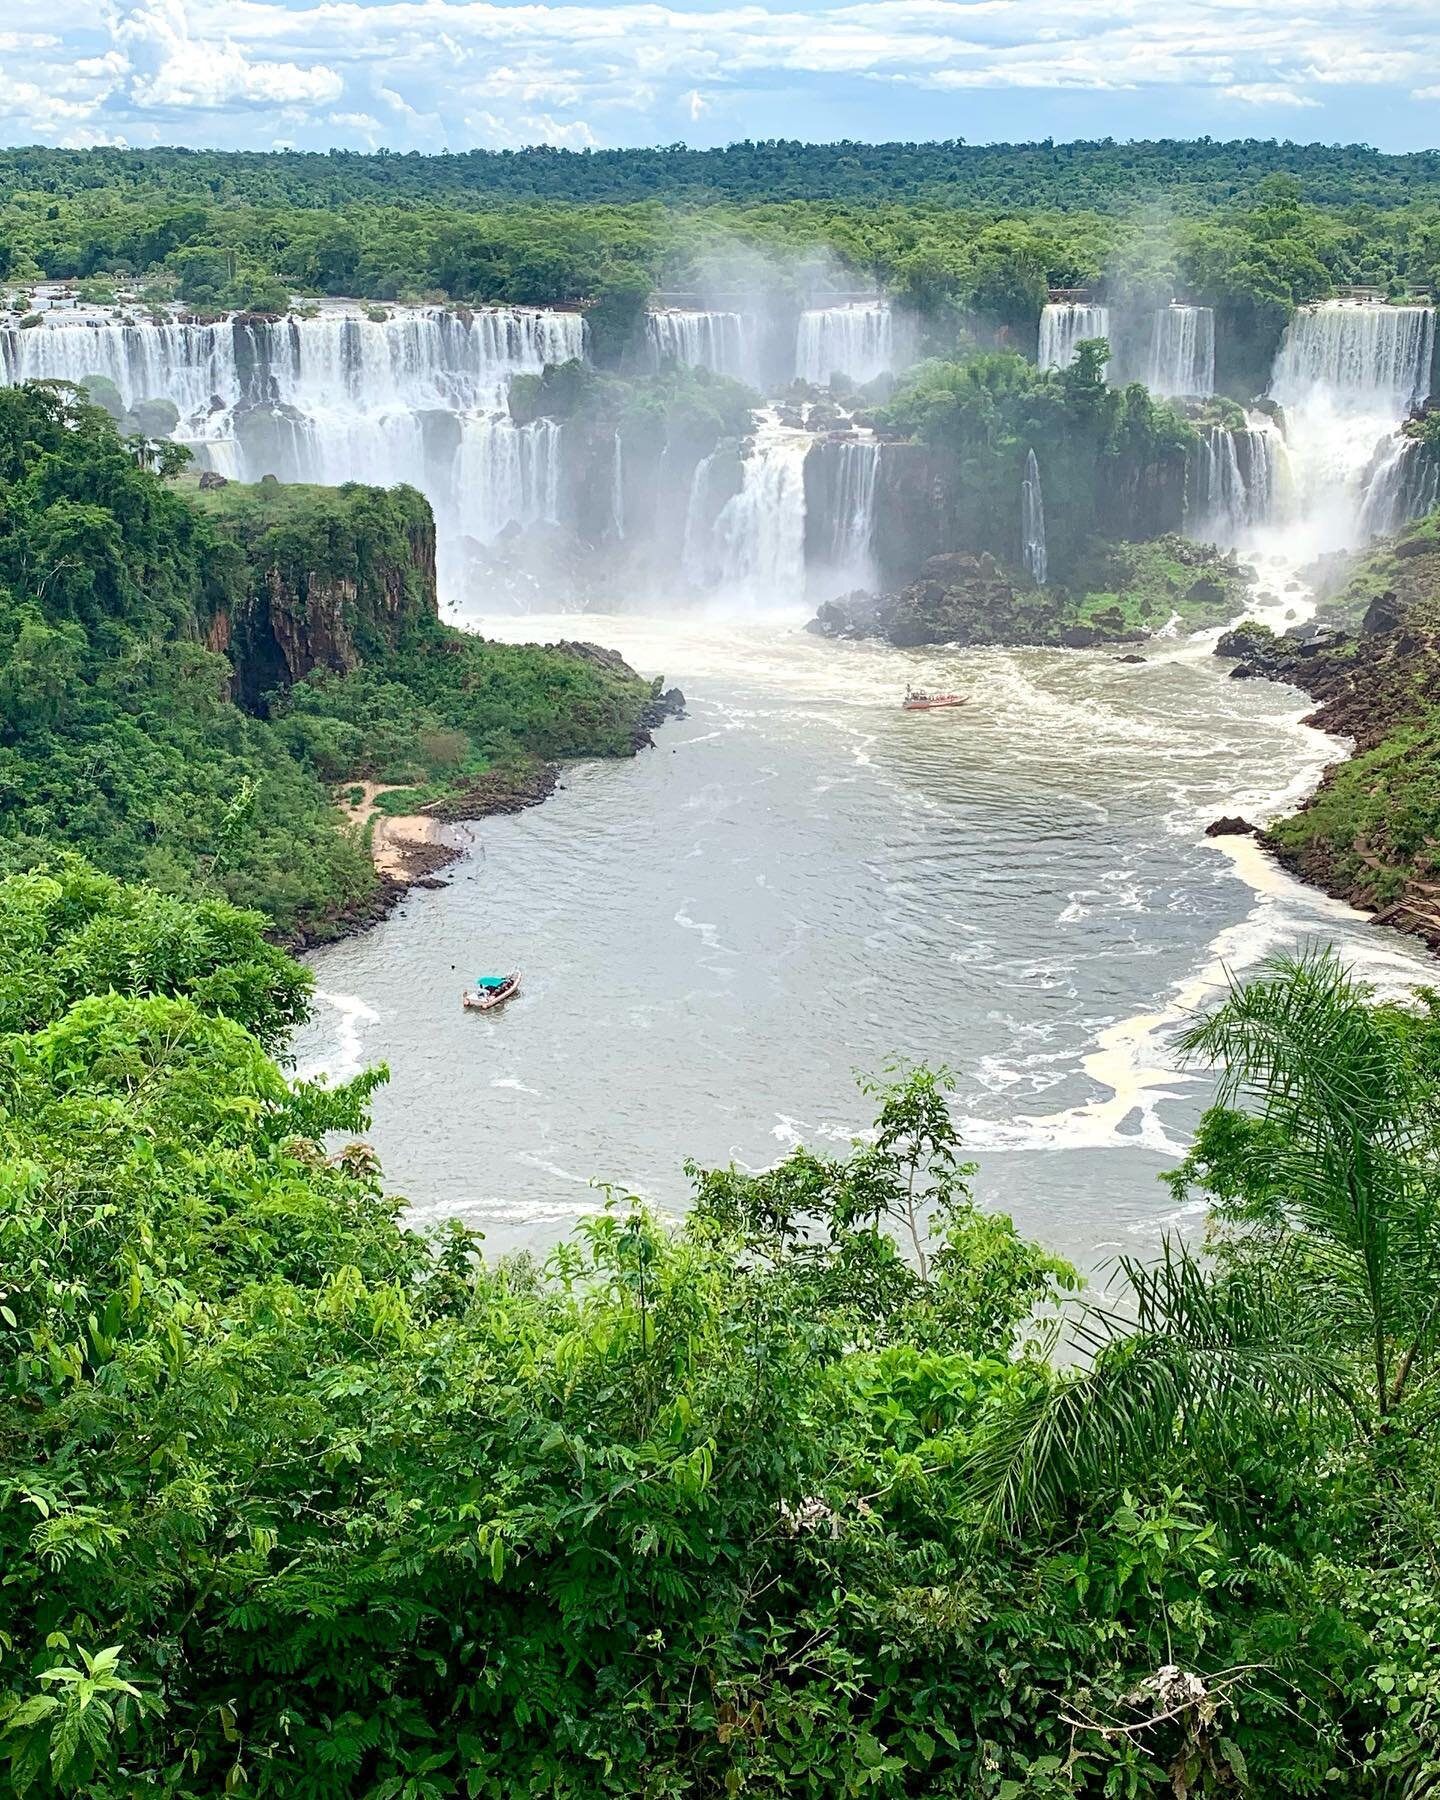 World's largest waterfall system&thinsp;
&thinsp;
Iguaz&uacute; Falls is almost 3 kilometers wide. It feeds the River Paran&aacute; (2nd largest river in South America, after Amazon). There are many nearby falls worth visiting (Nacunday, Monday, etc.